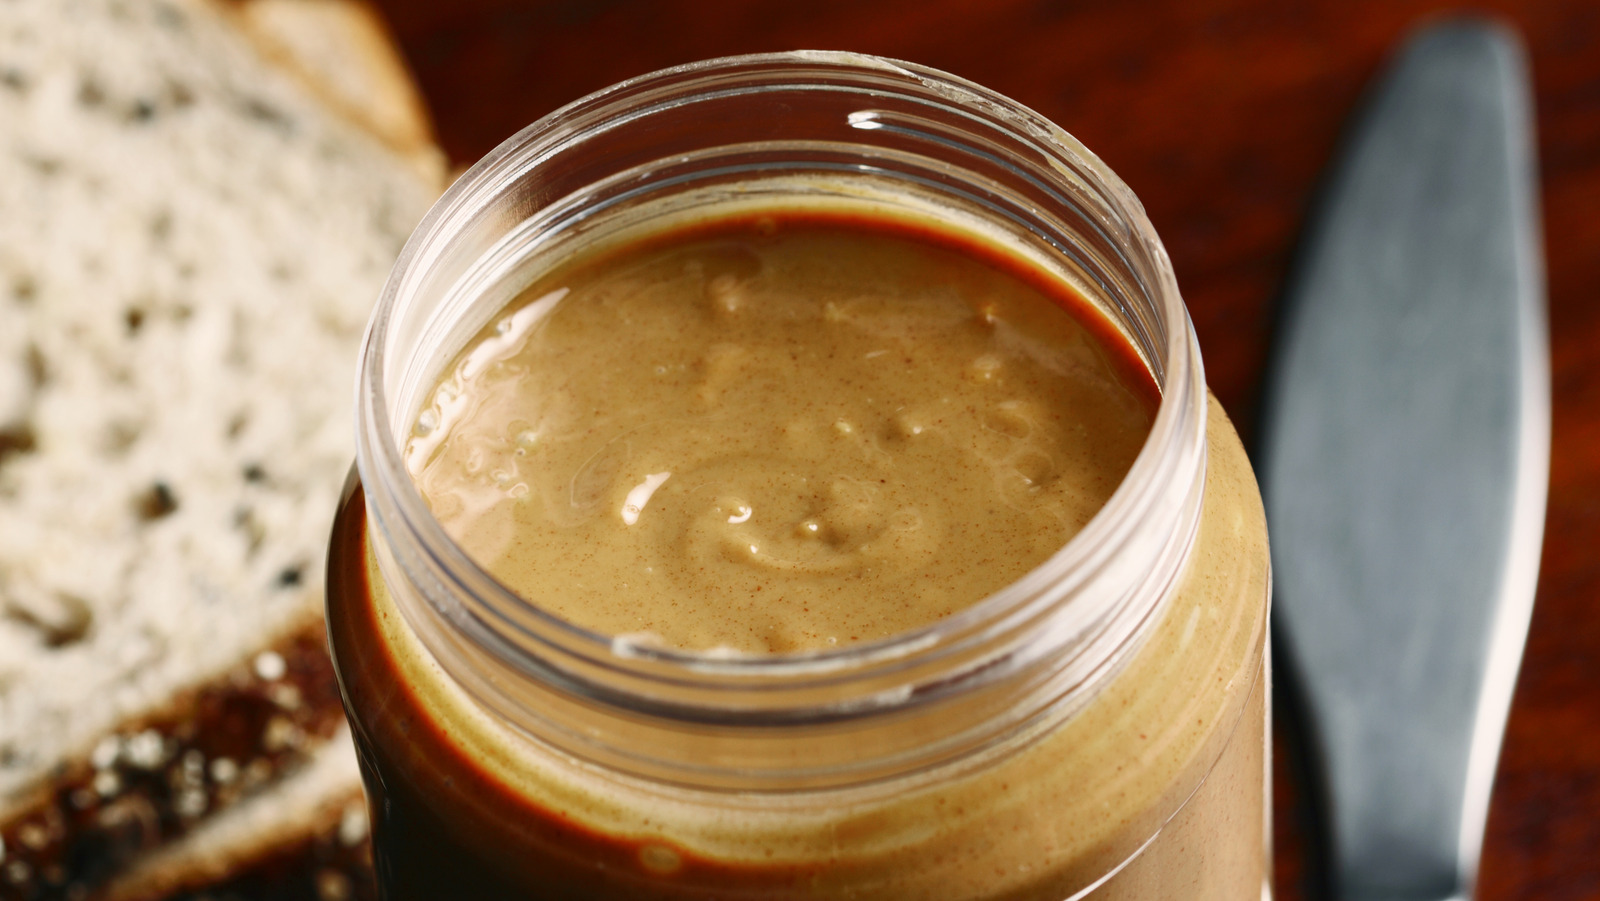 How long does an open jar of peanut butter last in the pantry?